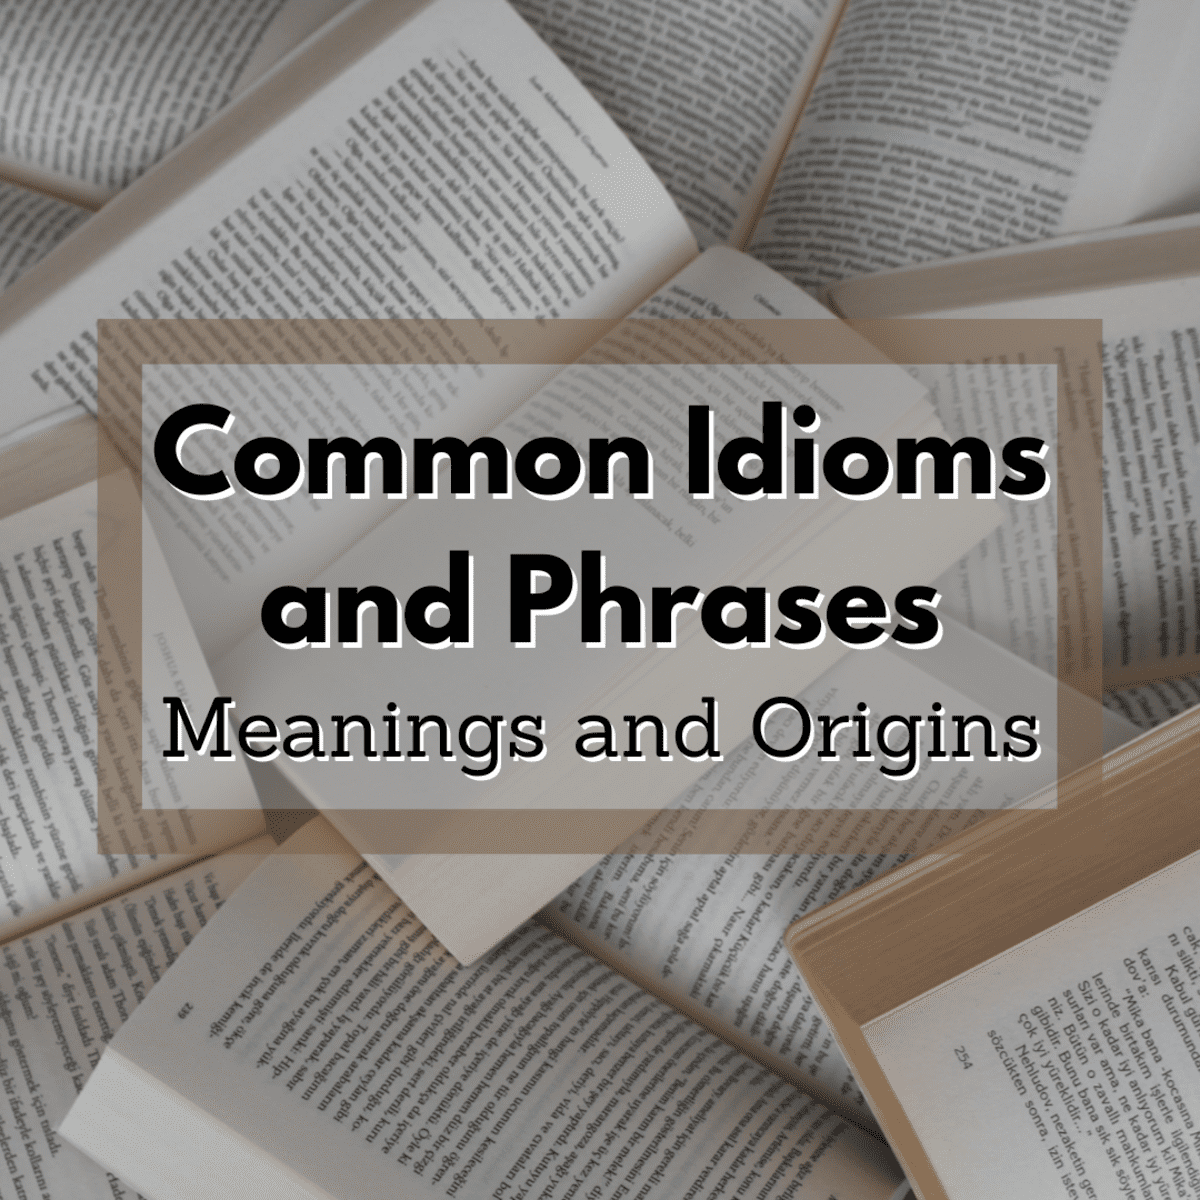 Common Idioms and Phrases: Meanings and Origins - Owlcation